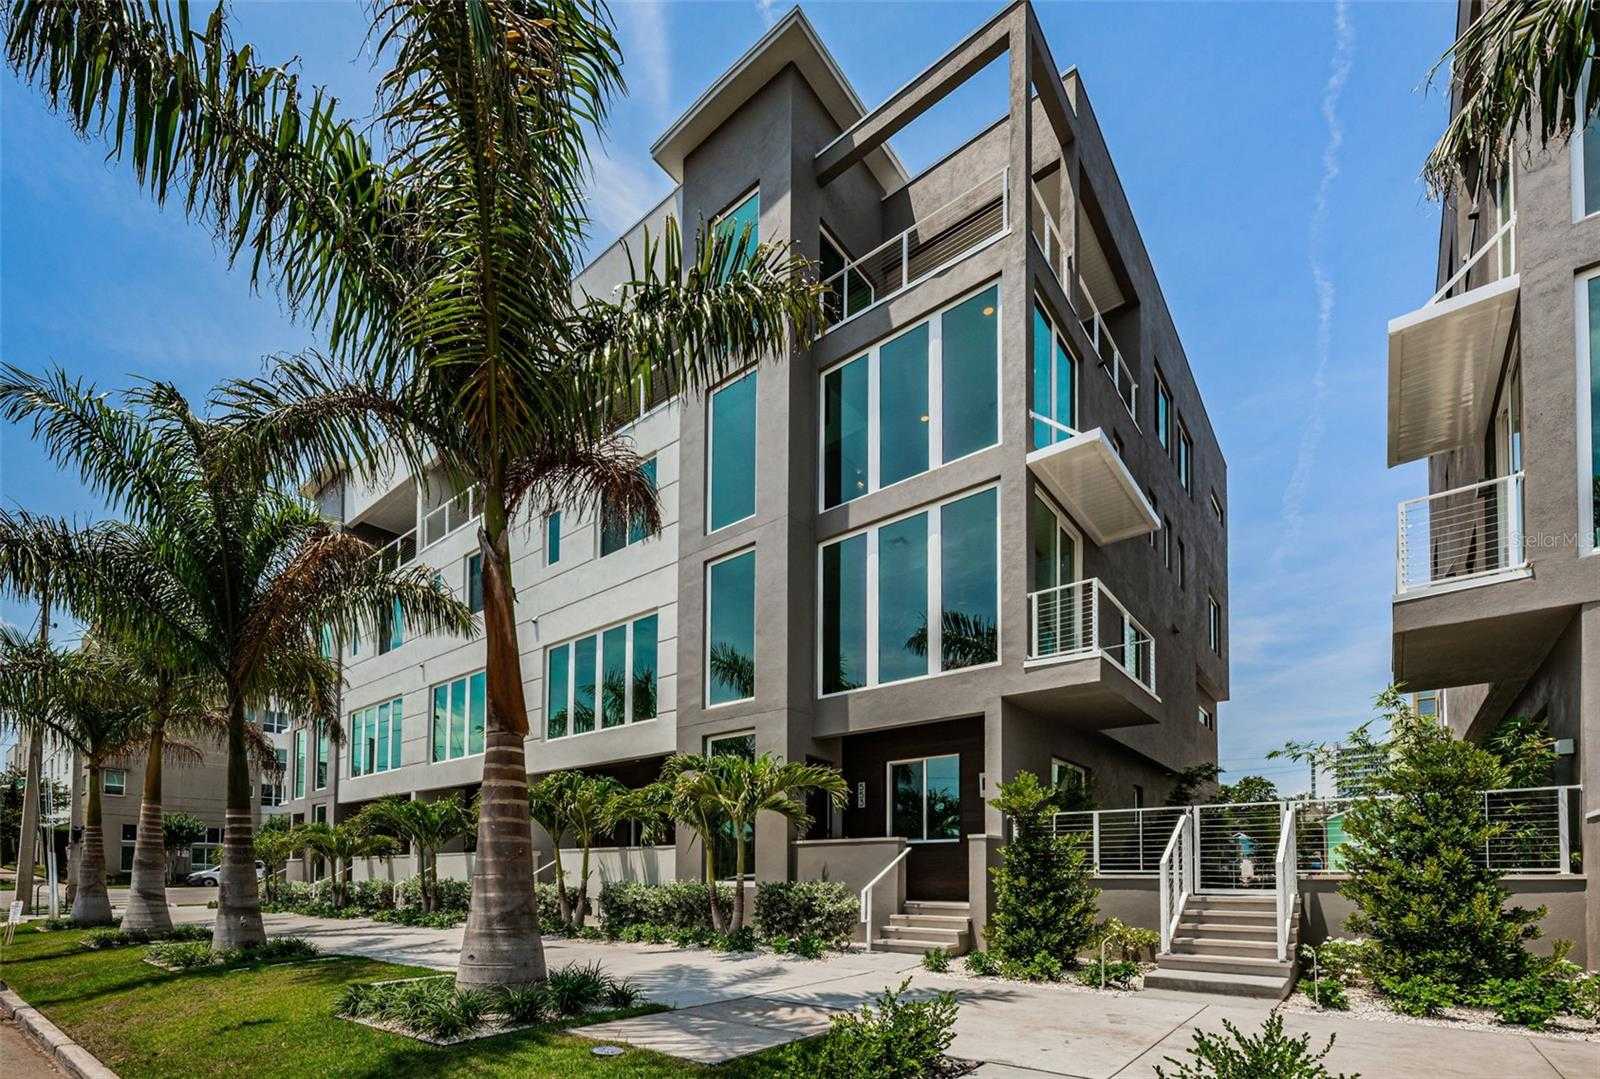 $1,795,000 - 4Br/4Ba -  for Sale in Royal Twnhms, St Petersburg